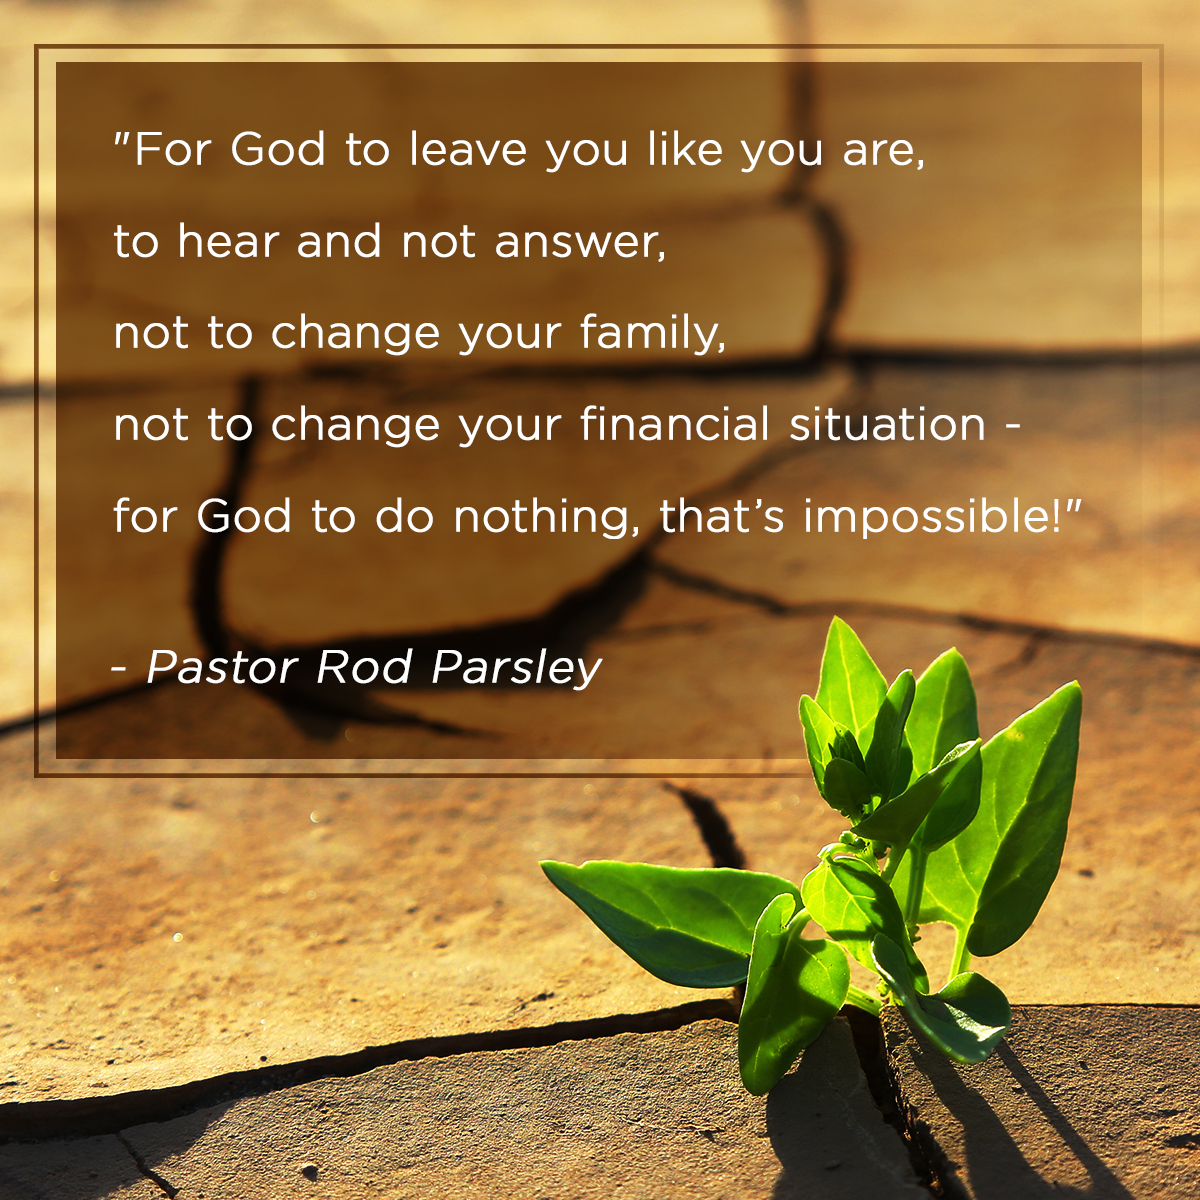 “For God to leave you like you are, to hear and not answer, not to change your family, not to change your financial situation - for God to do nothing, that’s impossible!” – Pastor Rod Parsley